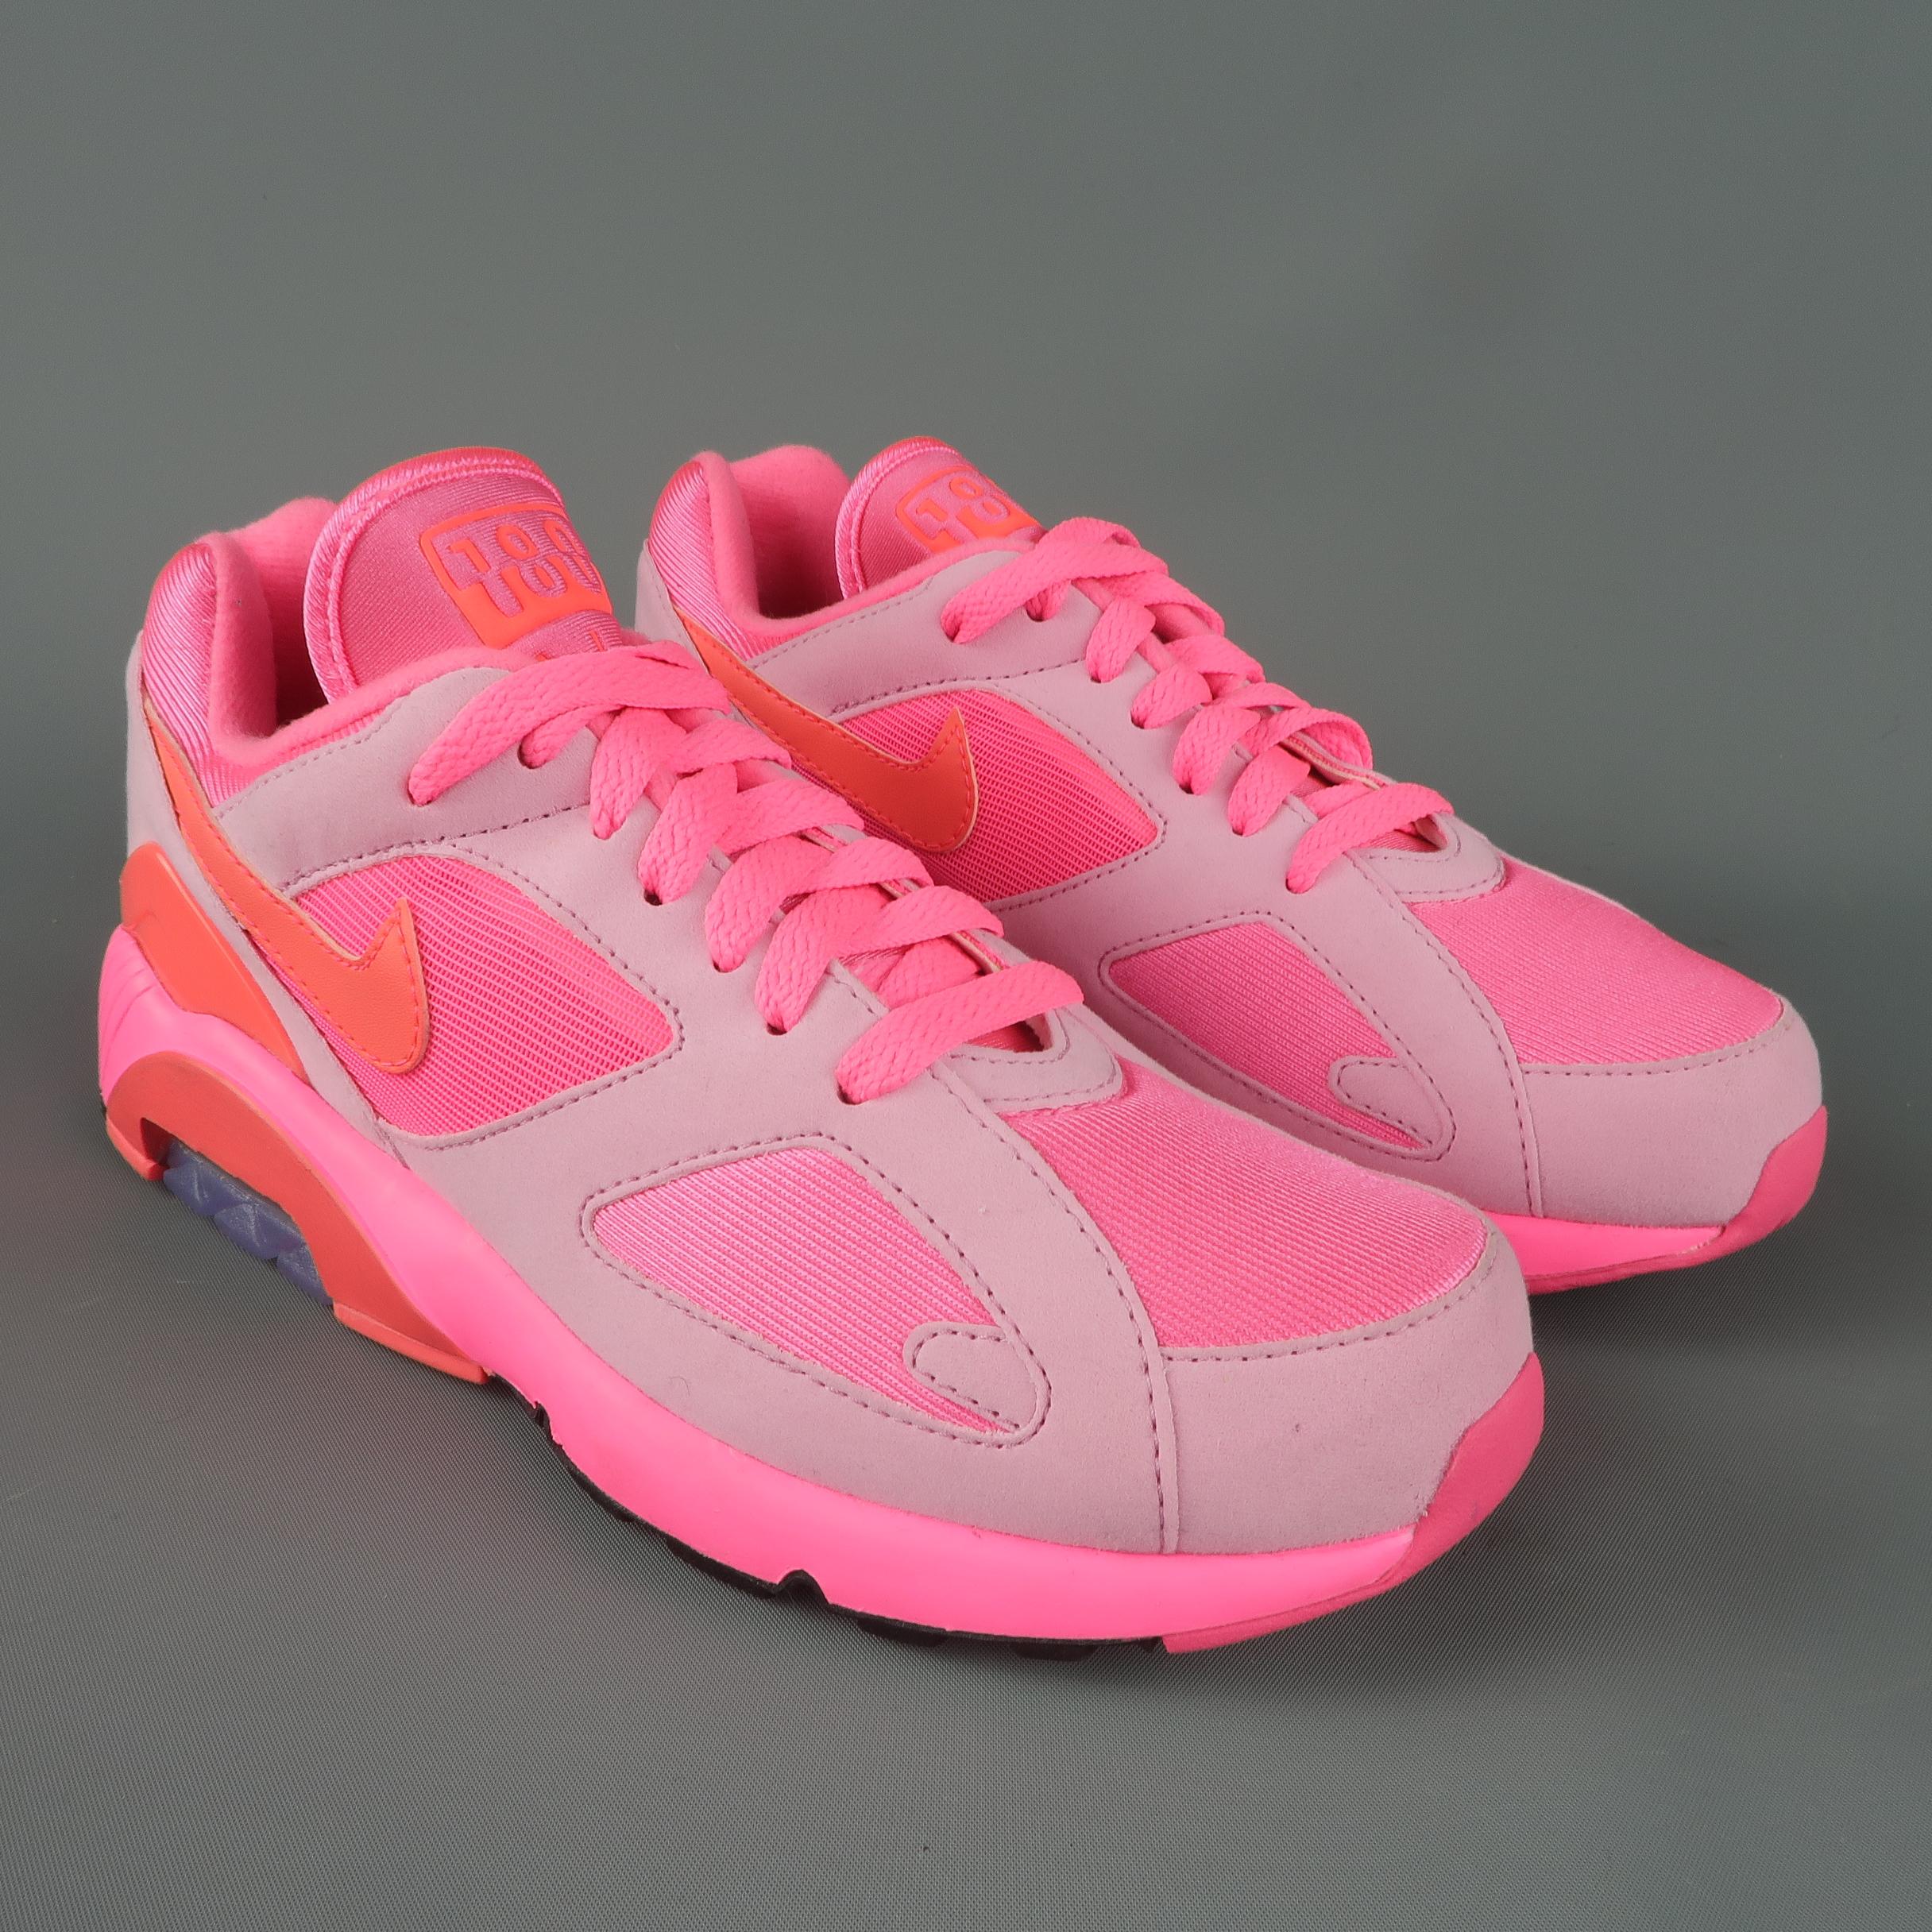 COMME des GARCONS X NIKE Air Max 180 trainers come in neon pin nylon with suede panels and a thick rubber sole. With box.
 
Excellent Pre-Owned Condition.
Marked: US 5.5